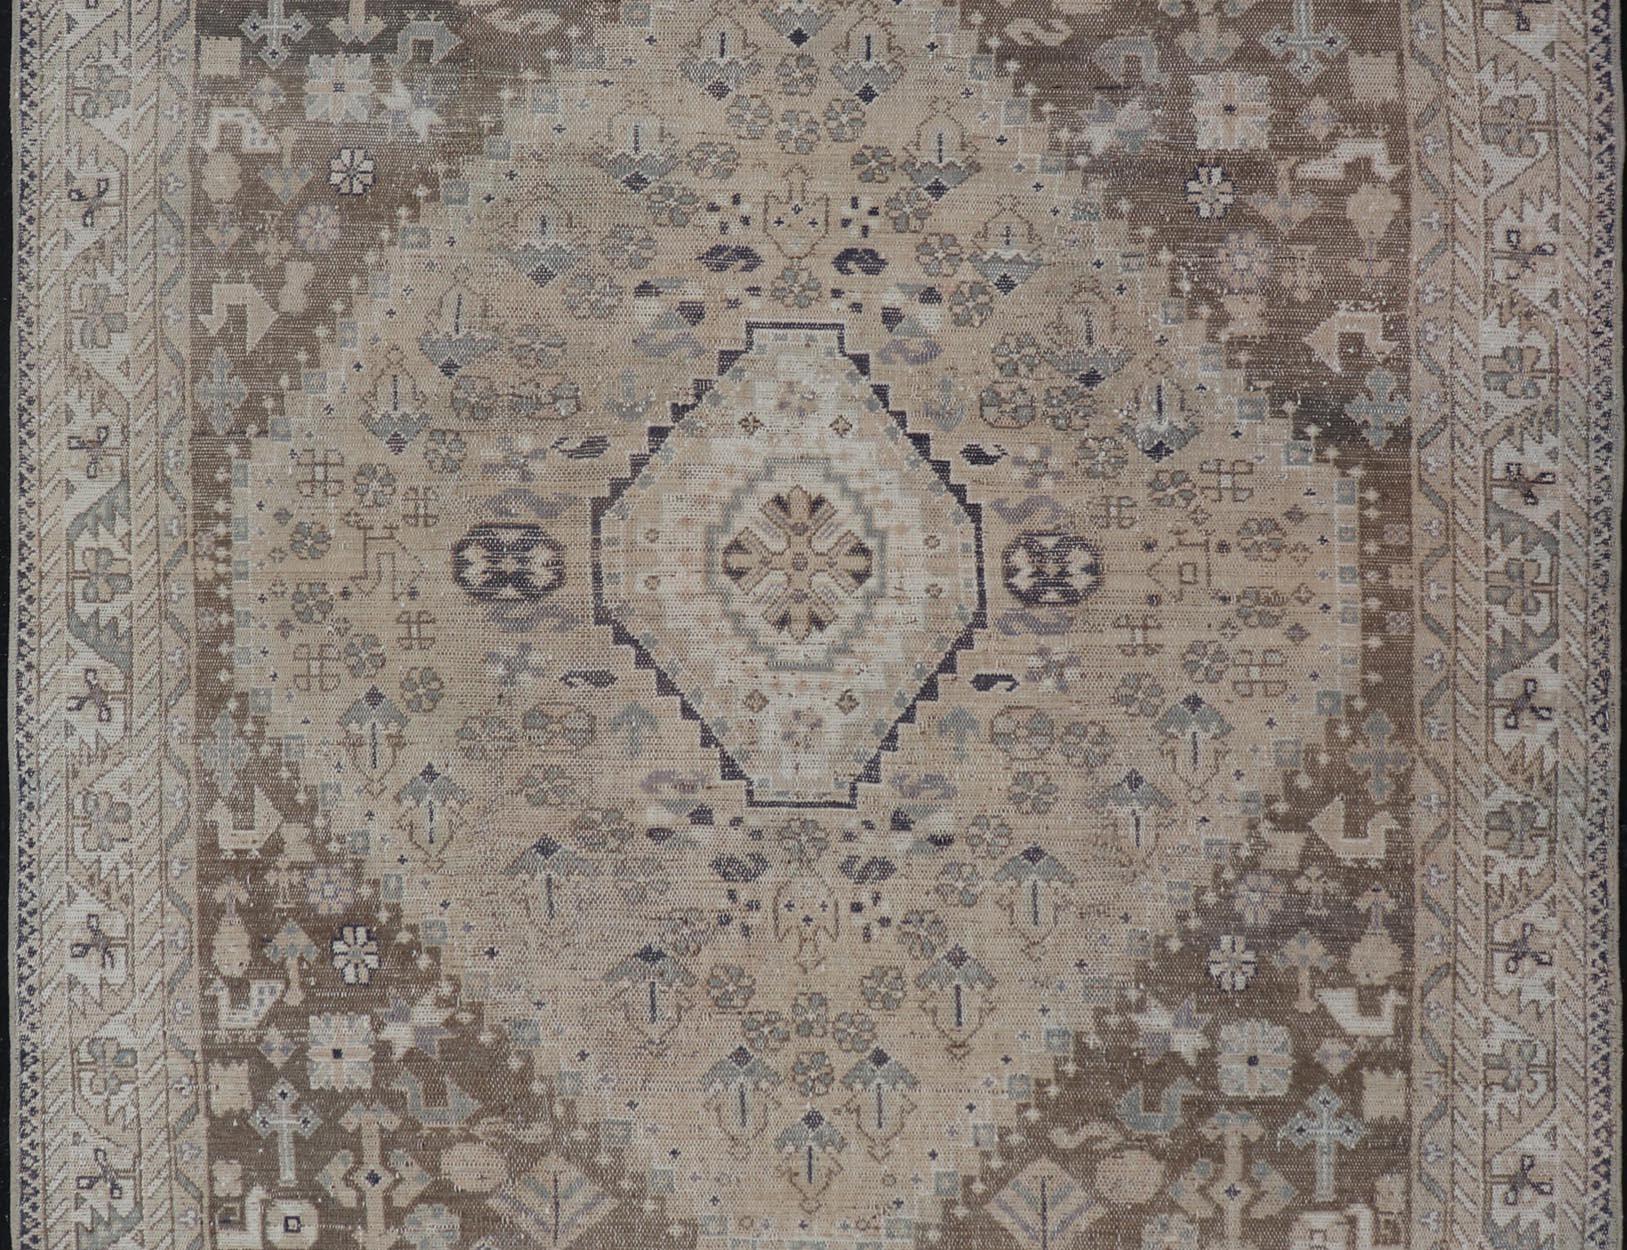 Tribal Persian Hand Knotted Shiraz Rug with Vertical Sub-Geometric Medallion